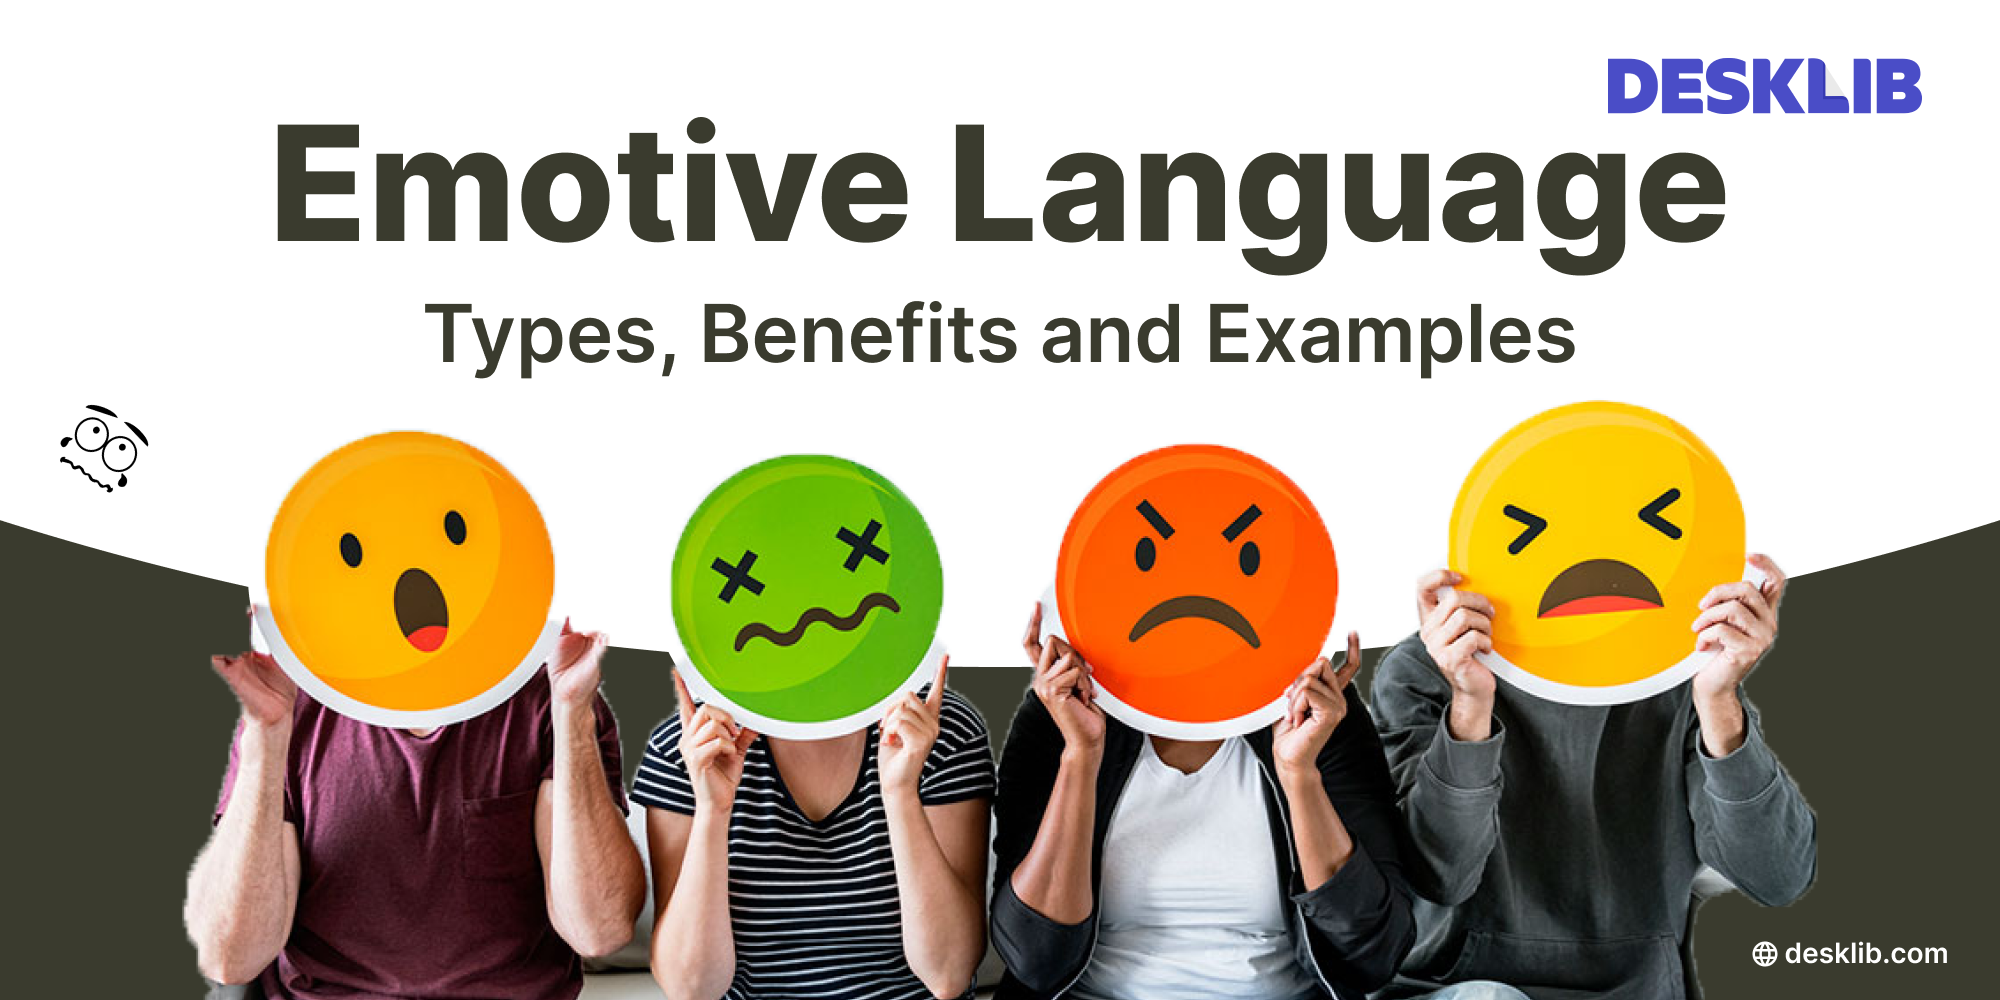 Emotive Language - Overview, Benefits and Examples